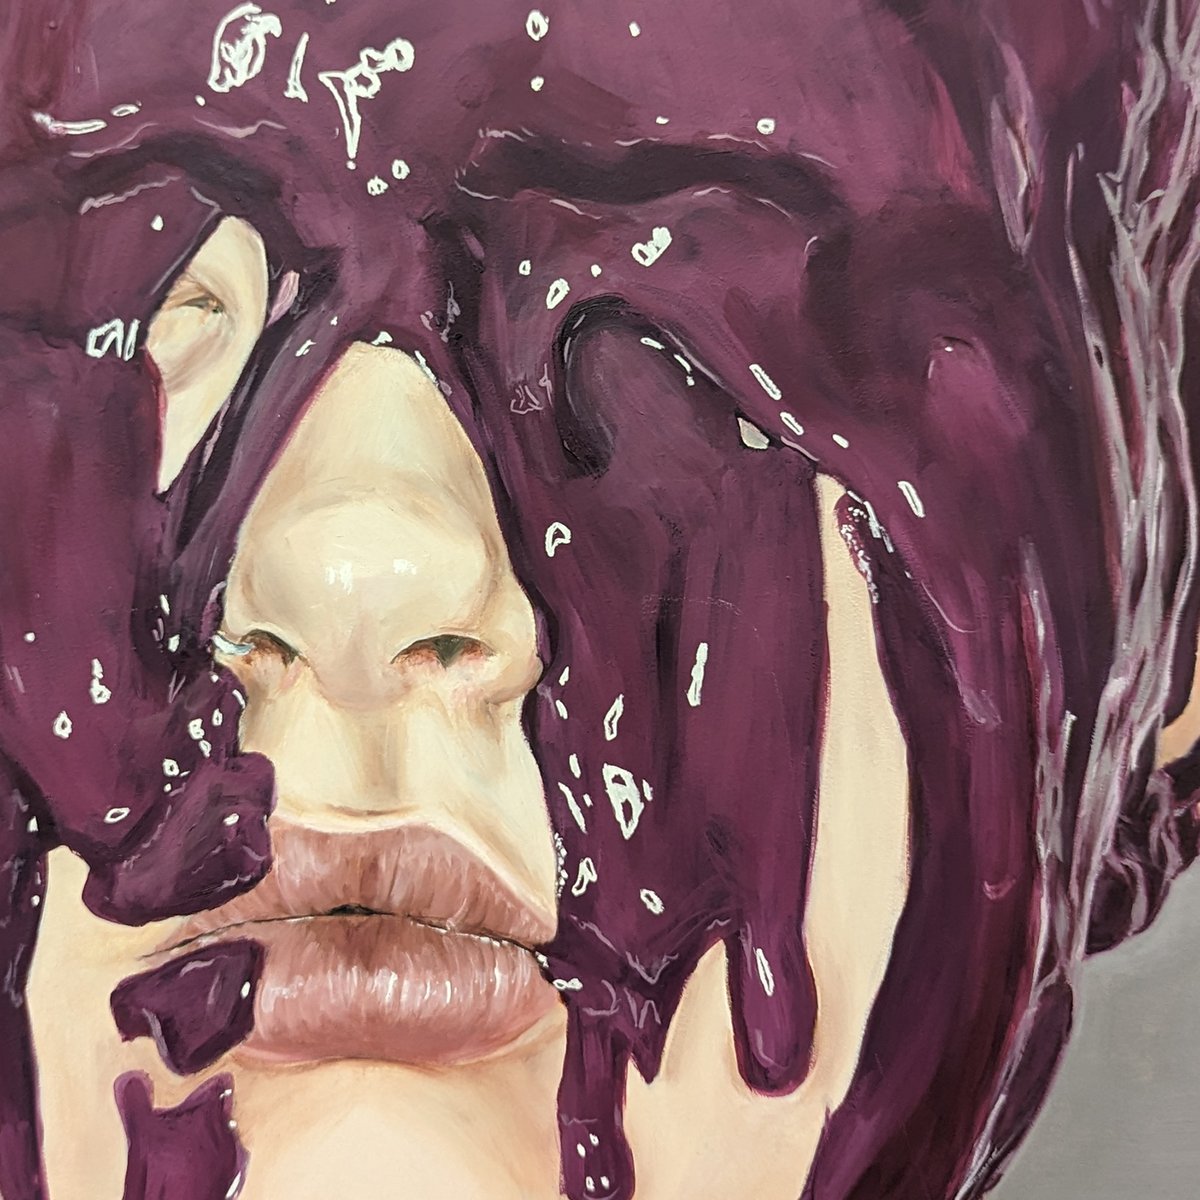 We have been enjoying posting cutaways by some of our amazingly talented students. To see the pieces in full, look out for the #TrueColours24 virtual art exhibition coming soon! 👀 📸 Cutaway shot of a painting by a student from @ICD1995